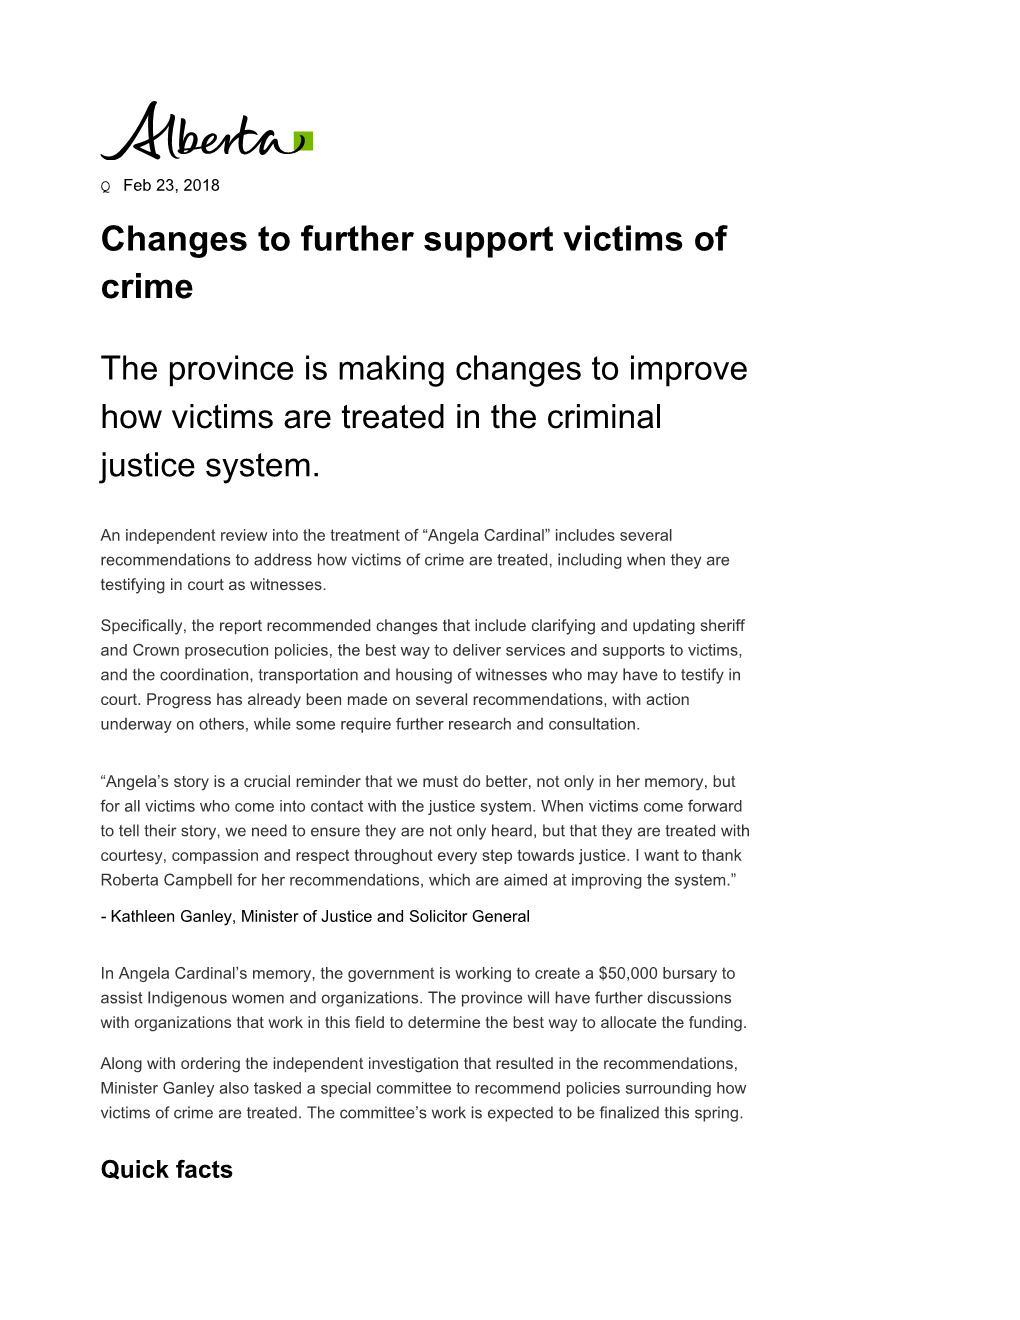 Changes to Further Support Victims of Crime